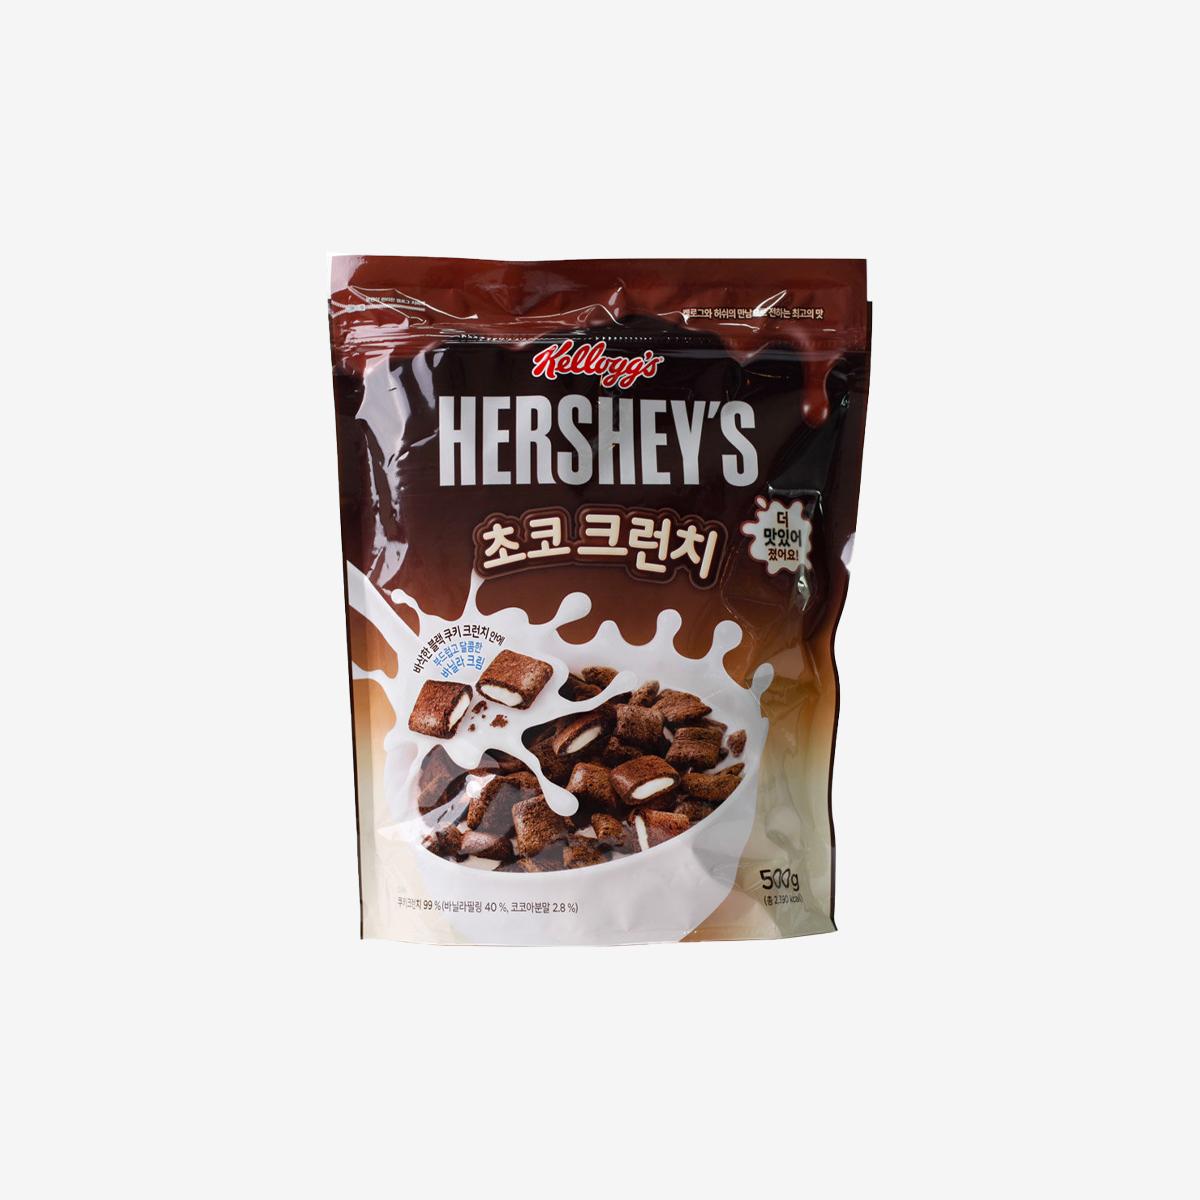 Hershey's Choco Crunch Cereal (500g)